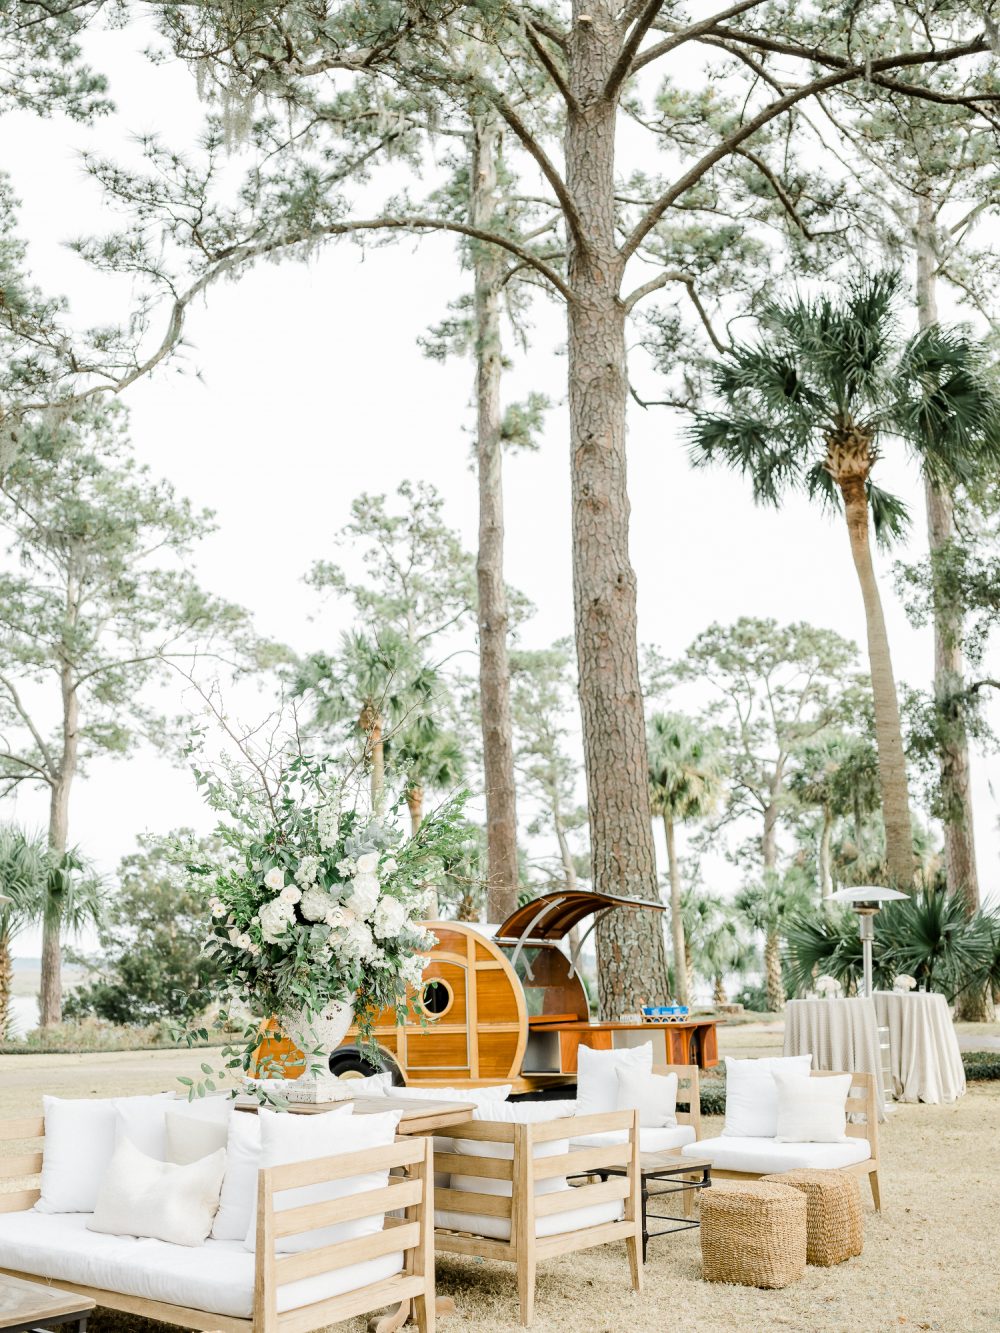 A southern, happy, pink wedding at the Montage Palmetto Bluff in South Carolina.